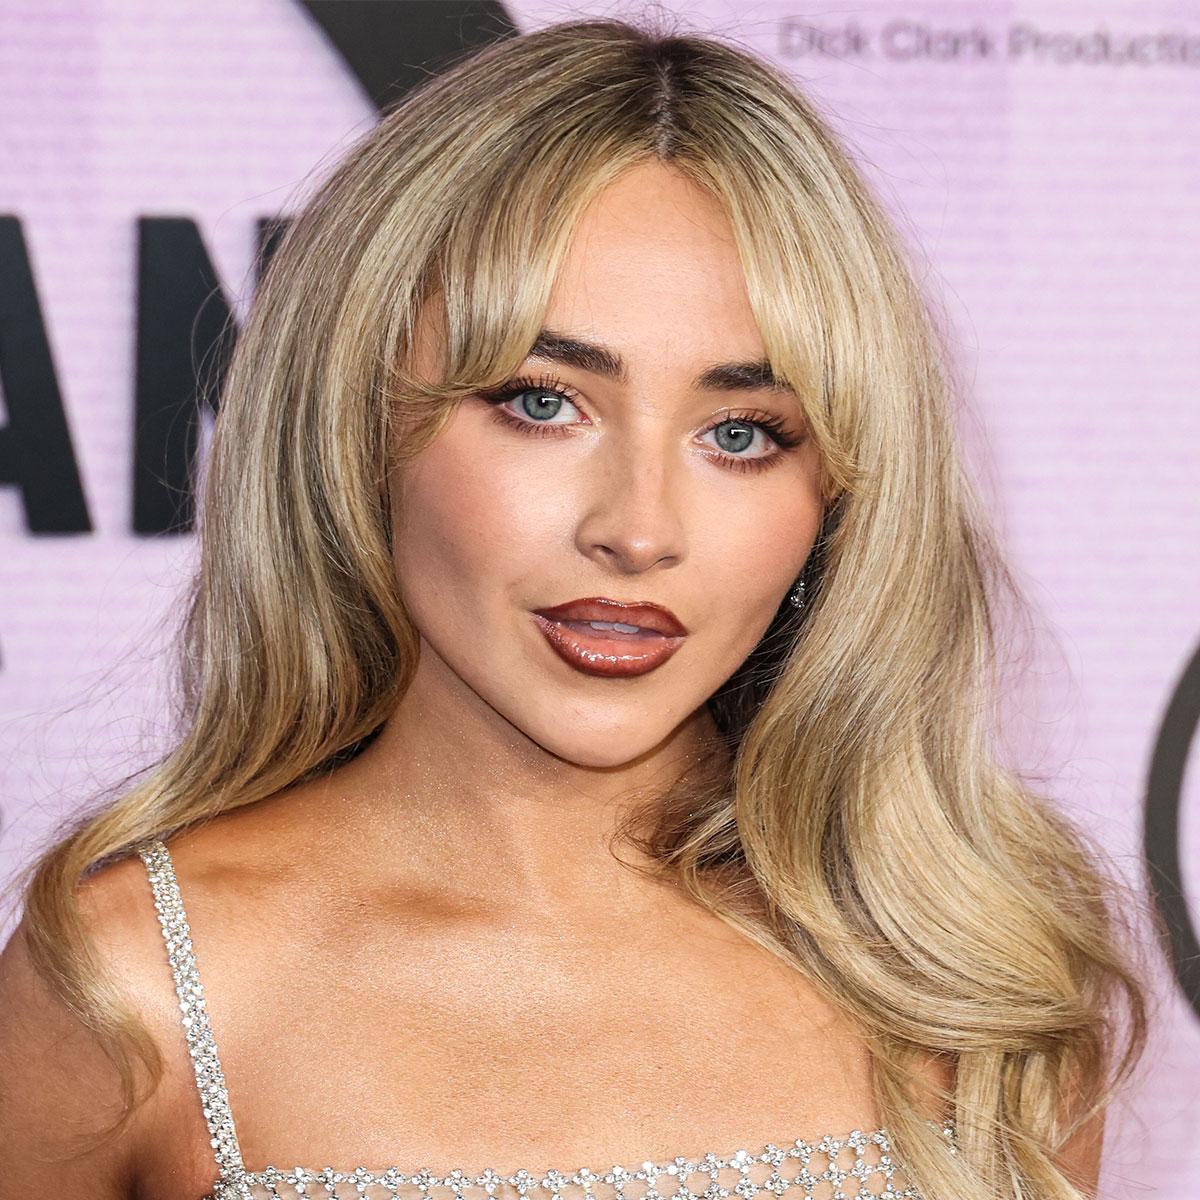 Sabrina Carpenter Simmers On Screen In A Black Crop Top And Micro Mini For  Her 'Nonsense' Video—Her Abs Are Insane! - SHEfinds